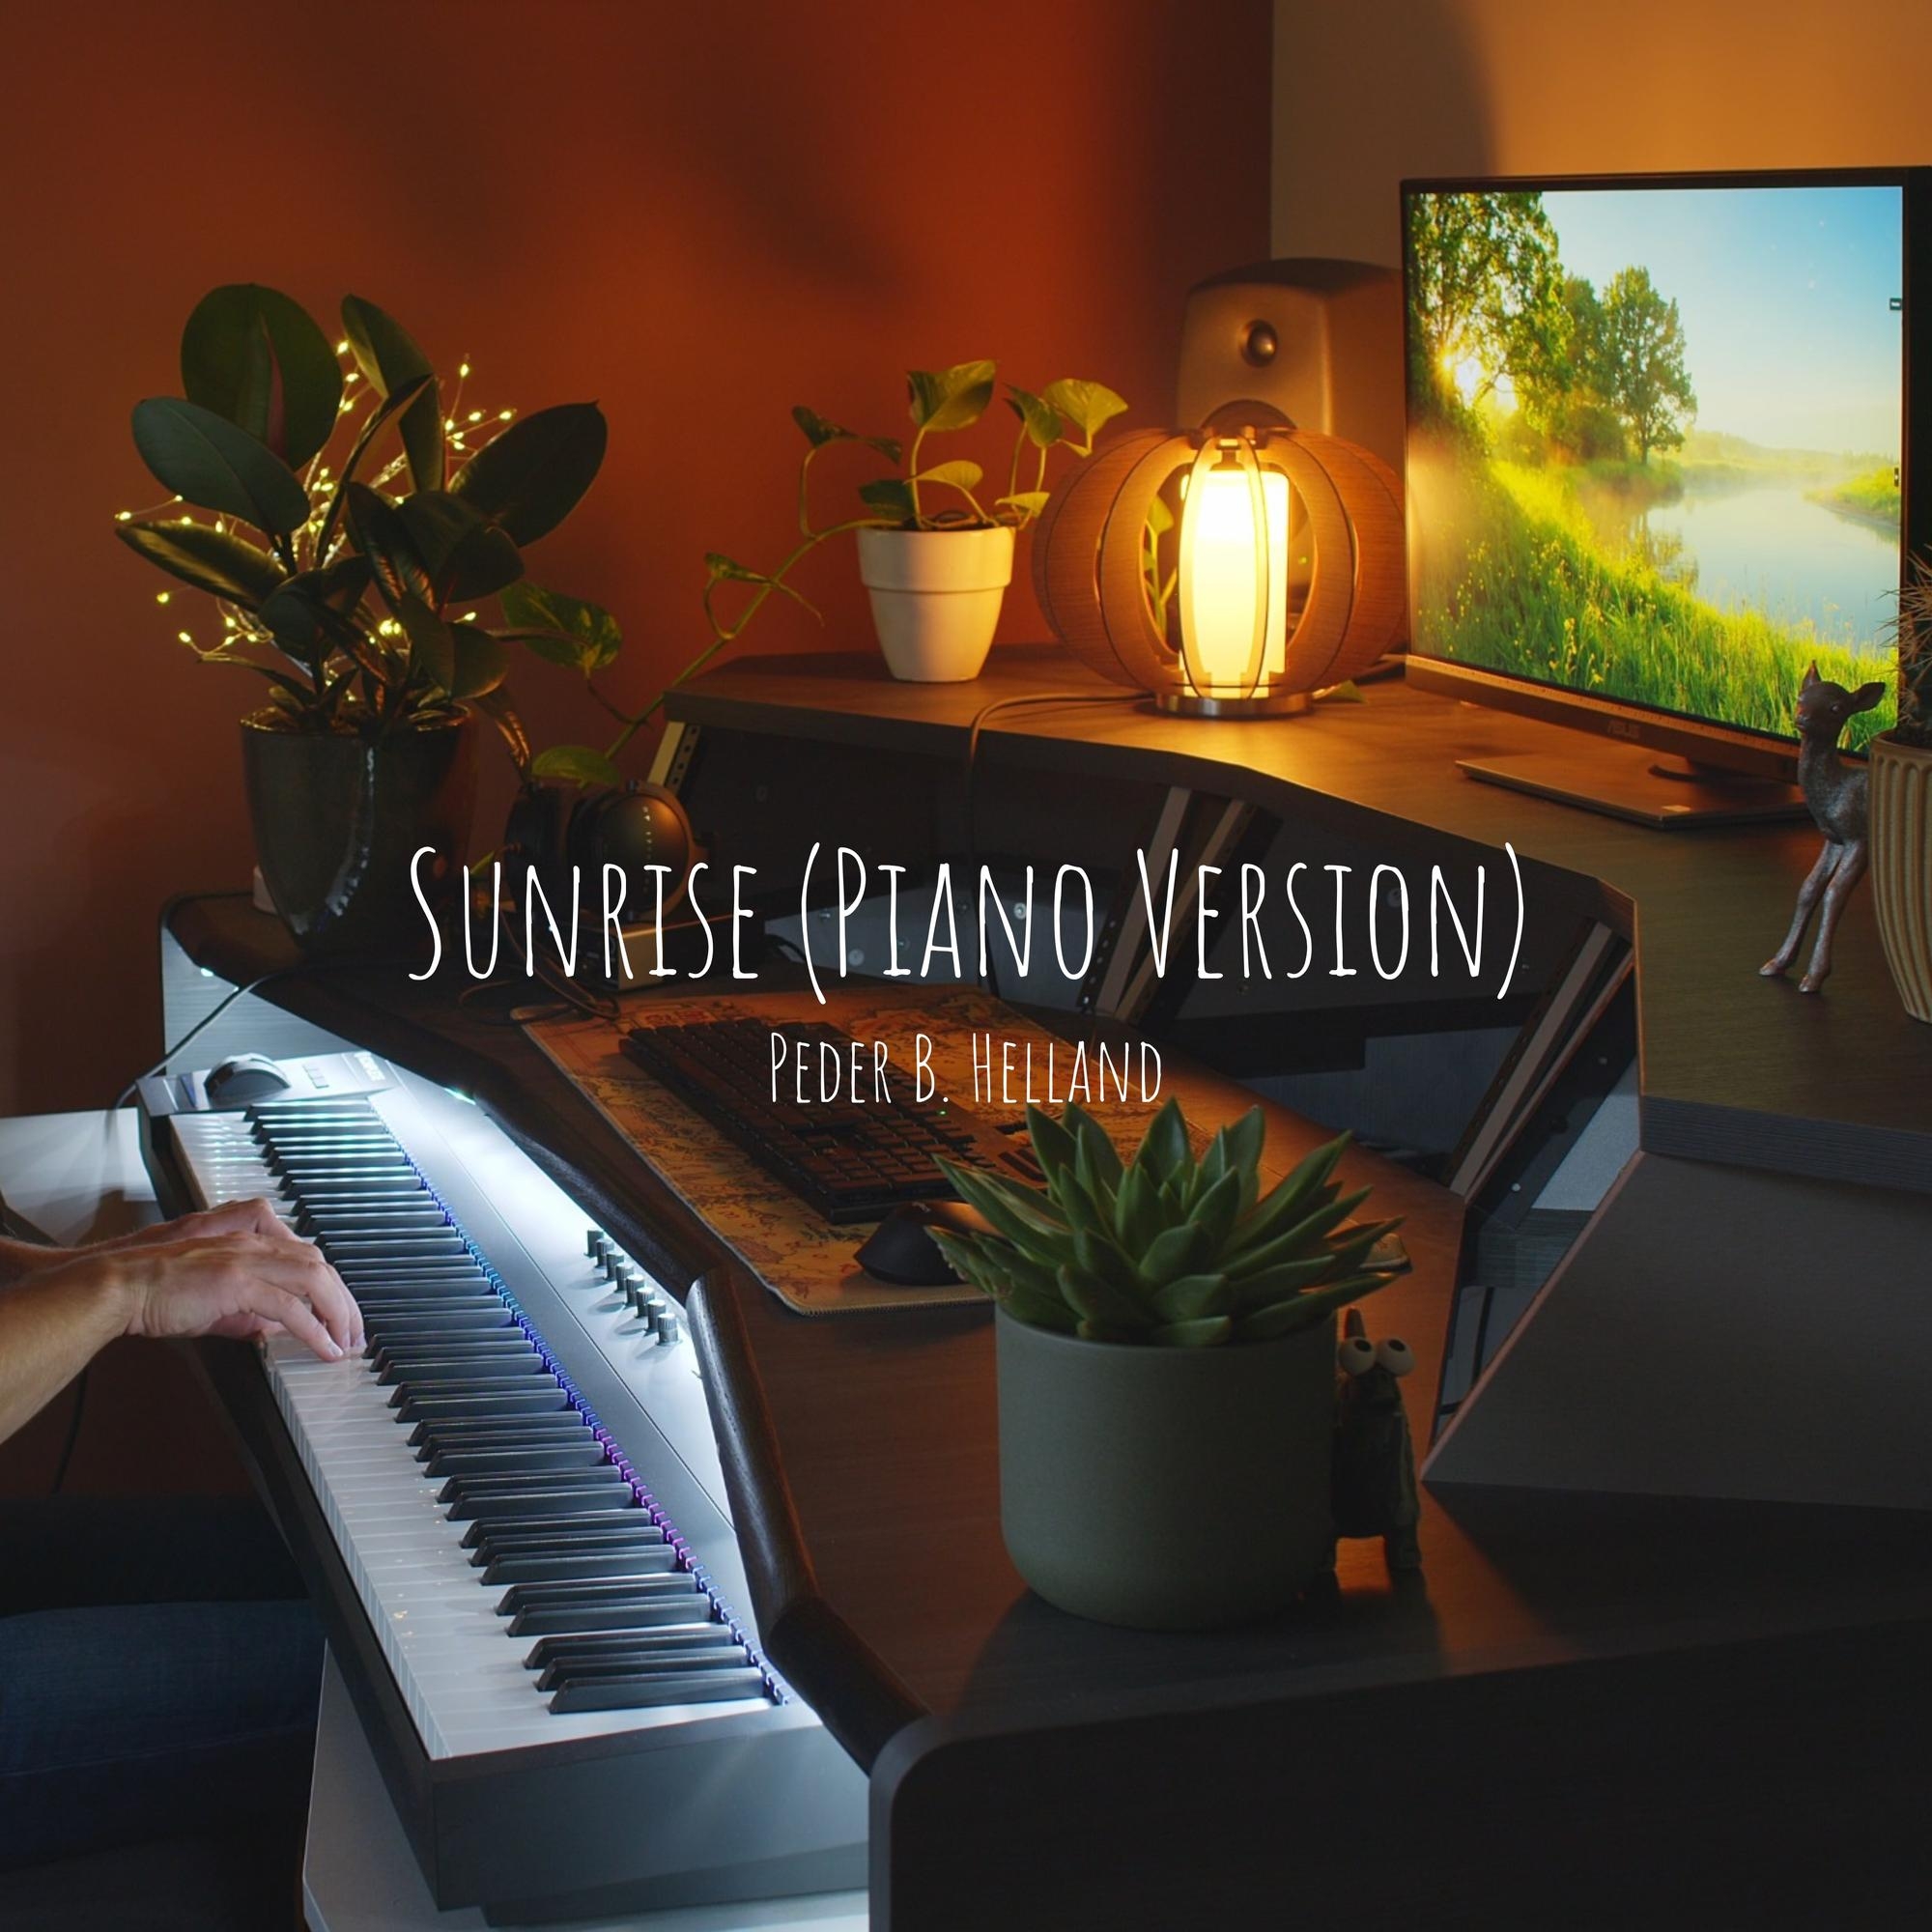 Cover art for the single Sunrise (Piano Version) by Peder B. Helland